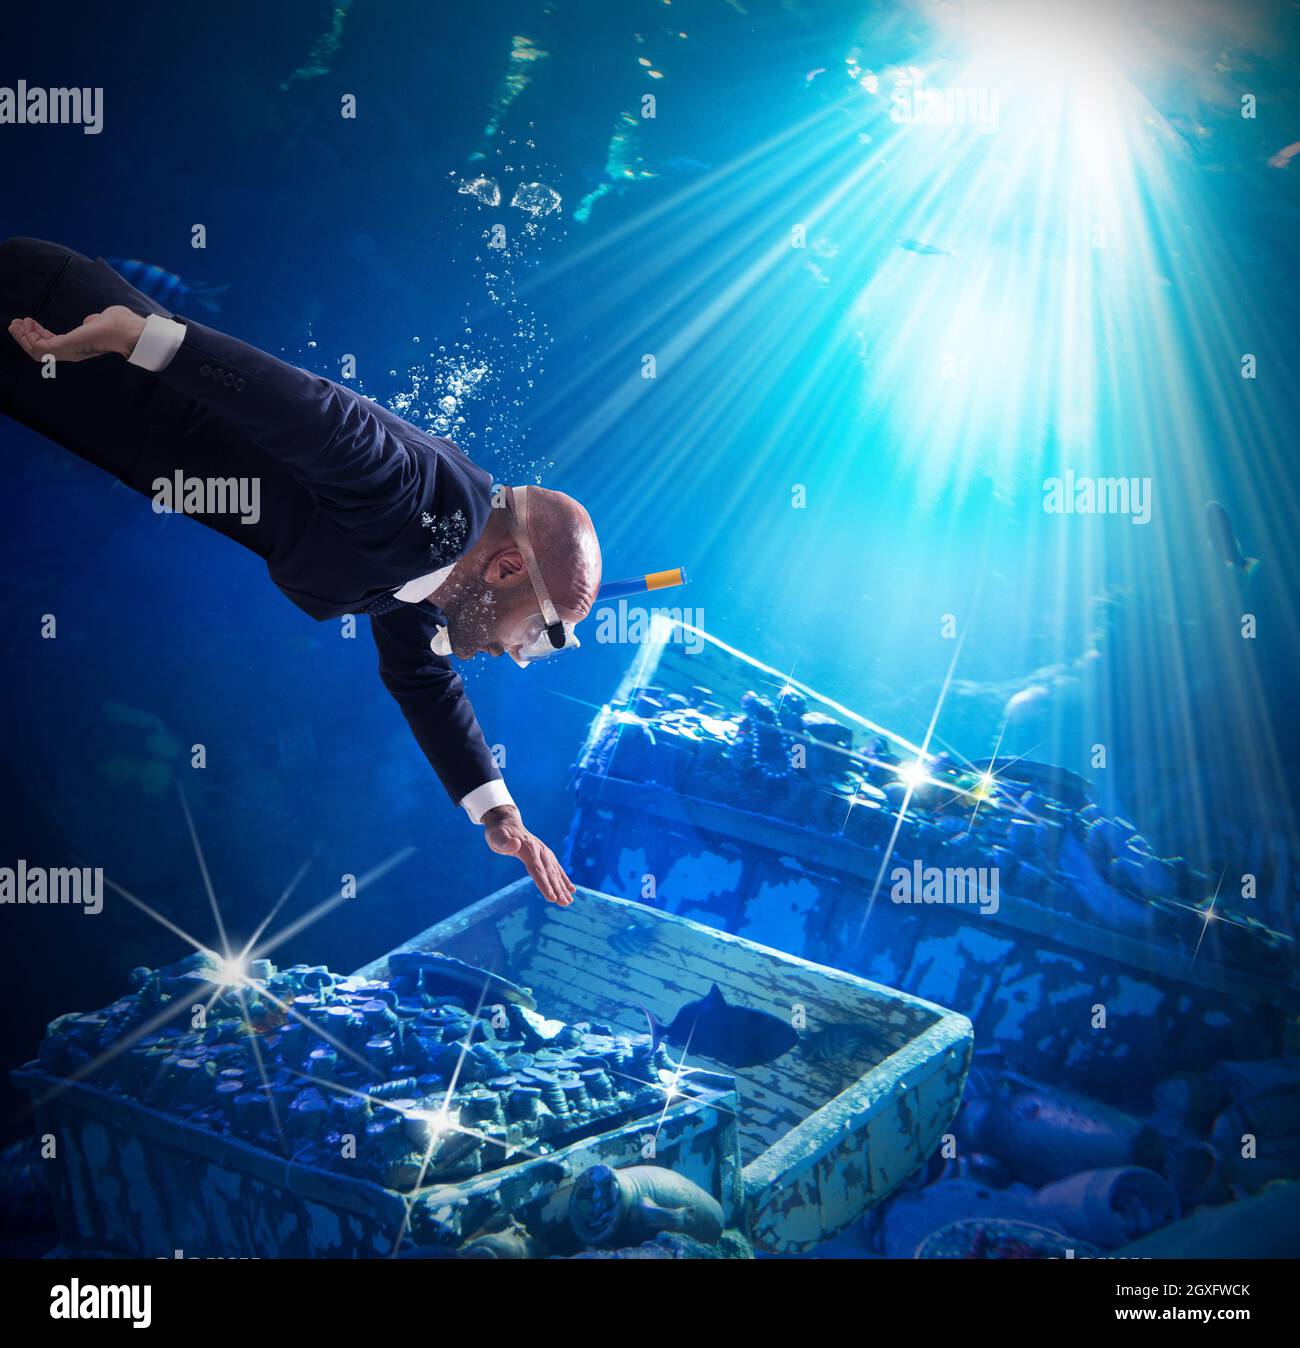 Man finds trunks with treasures under water Stock Photo